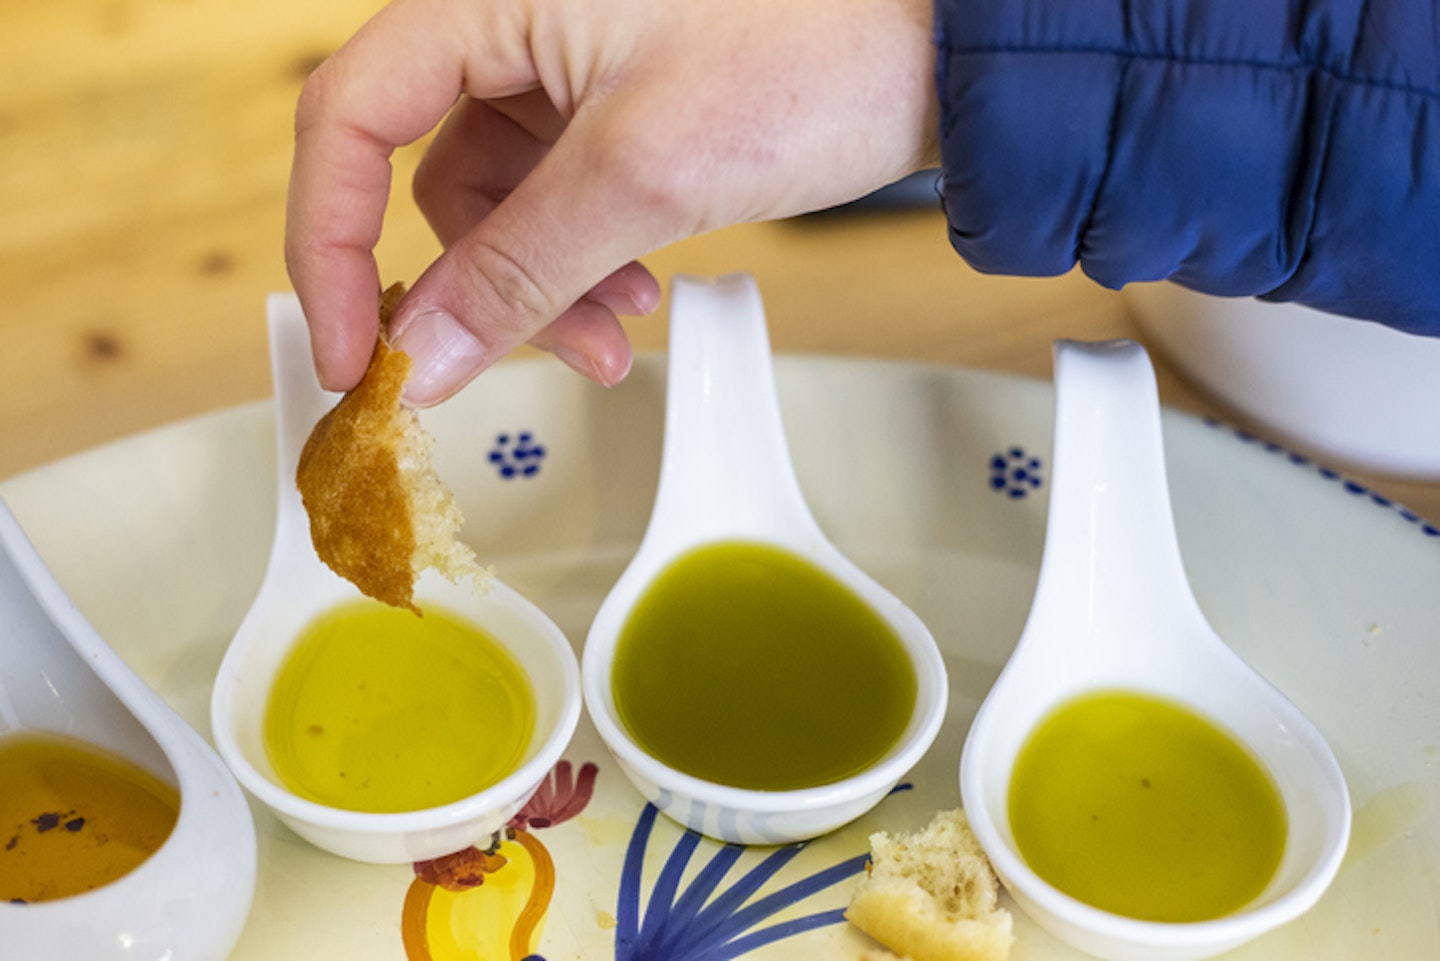 A human hand dips bread in different types of flavored extra virgin olive oils from Apulia, Italy.